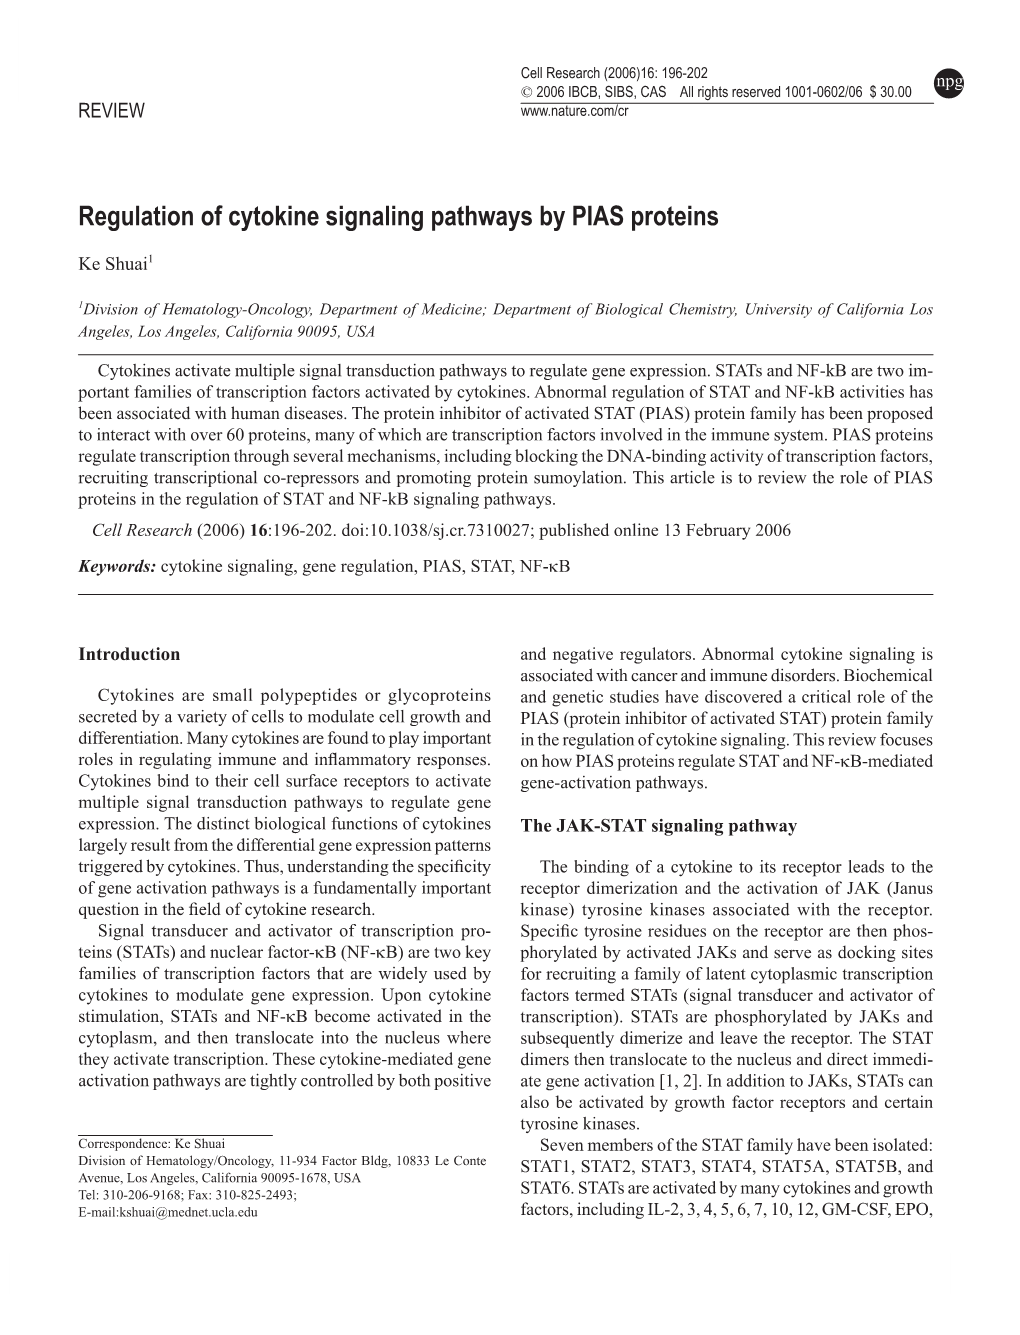 Regulation of Cytokine Signaling Pathways by PIAS Proteins